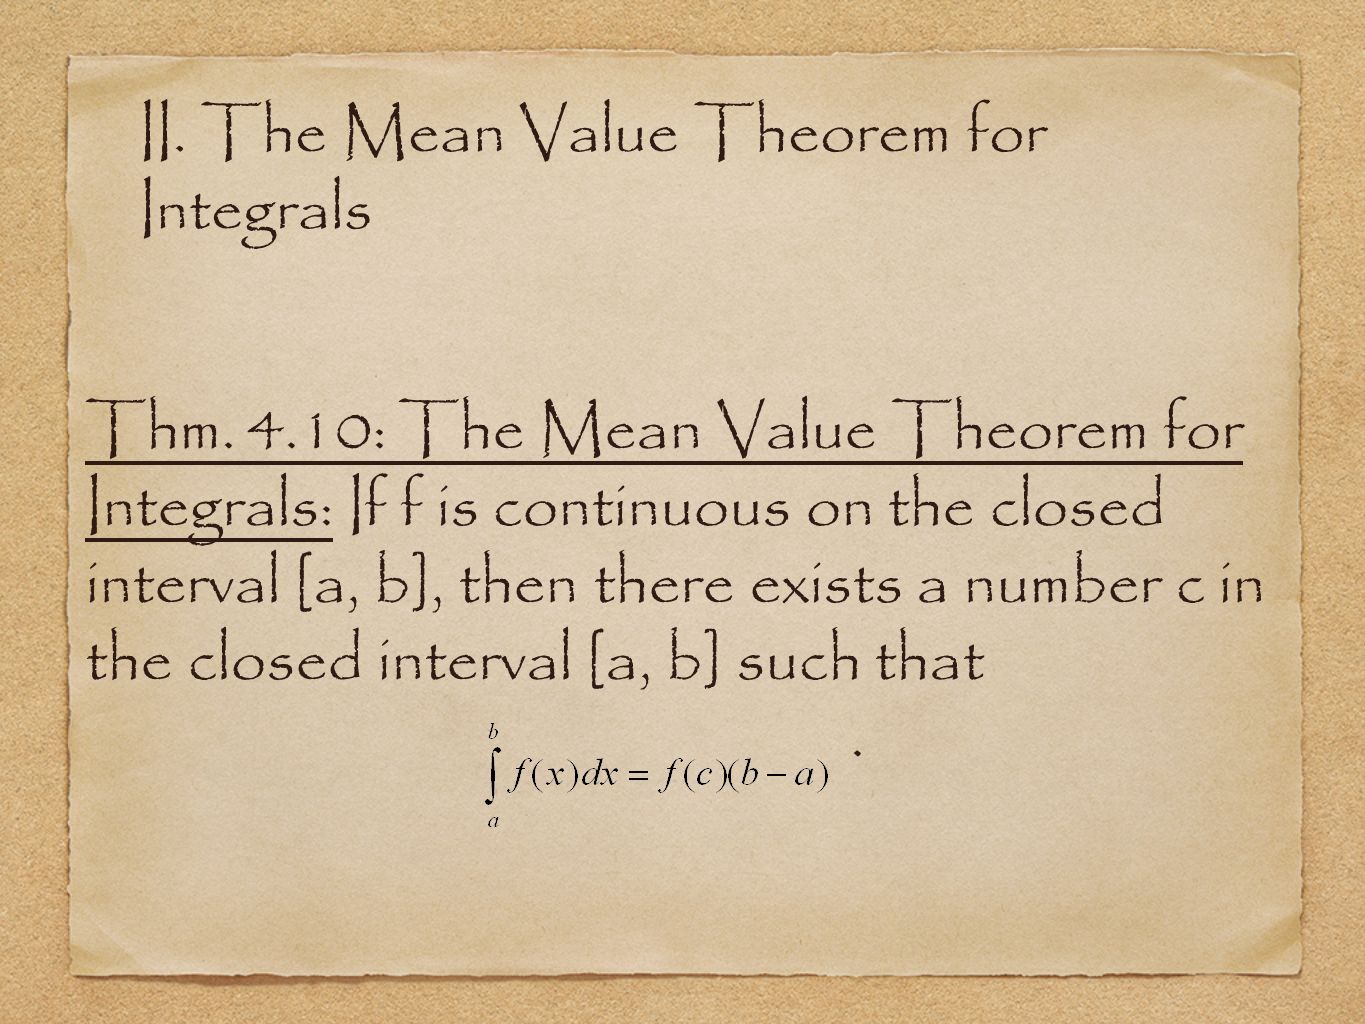 II. The Mean Value Theorem for Integrals Thm.